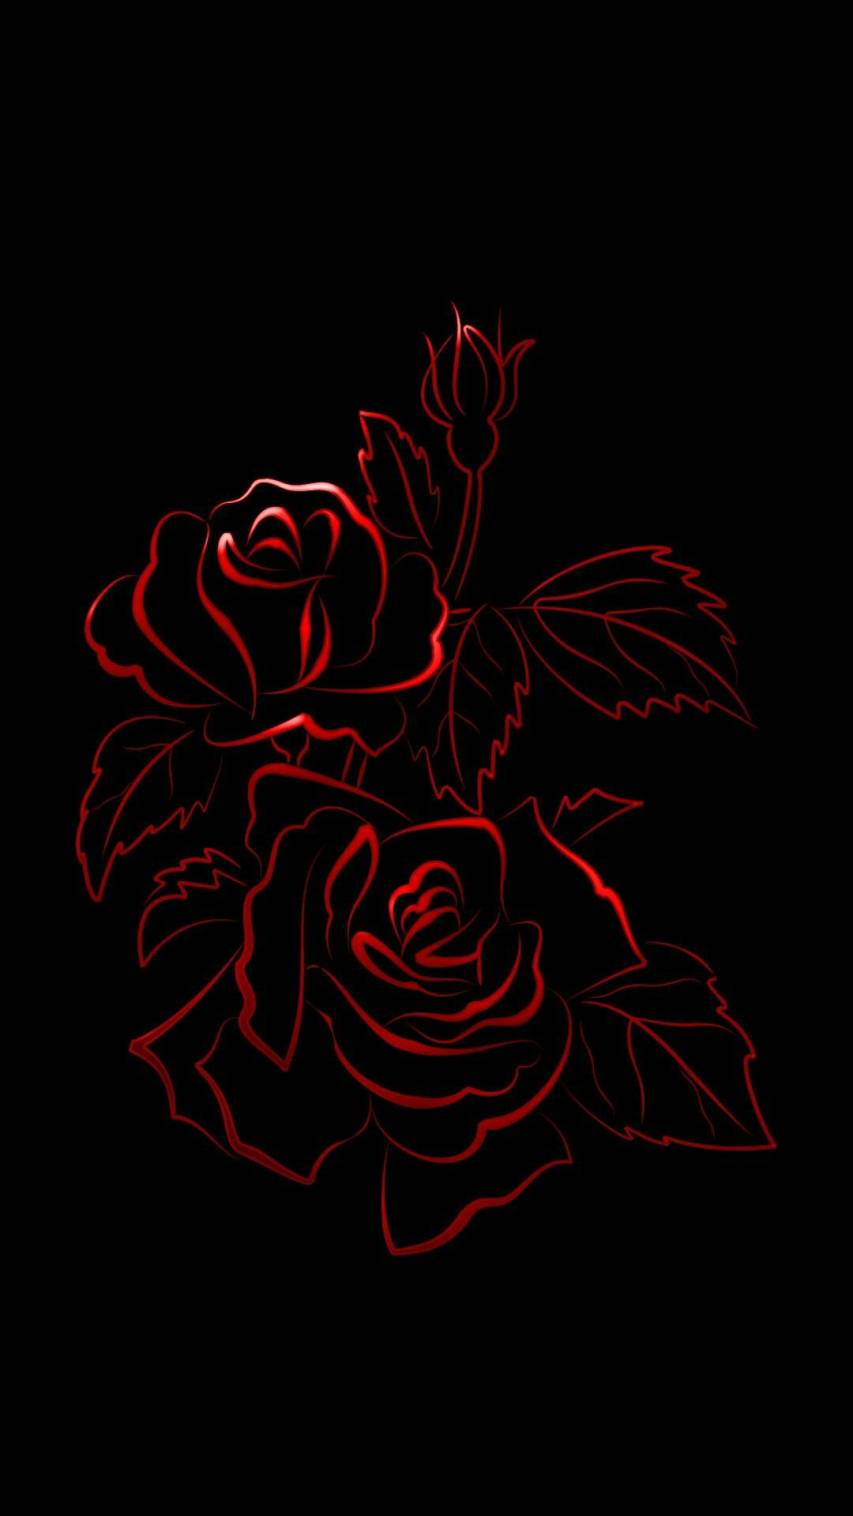 Flowers Red and Black iPhone Backgrounds image